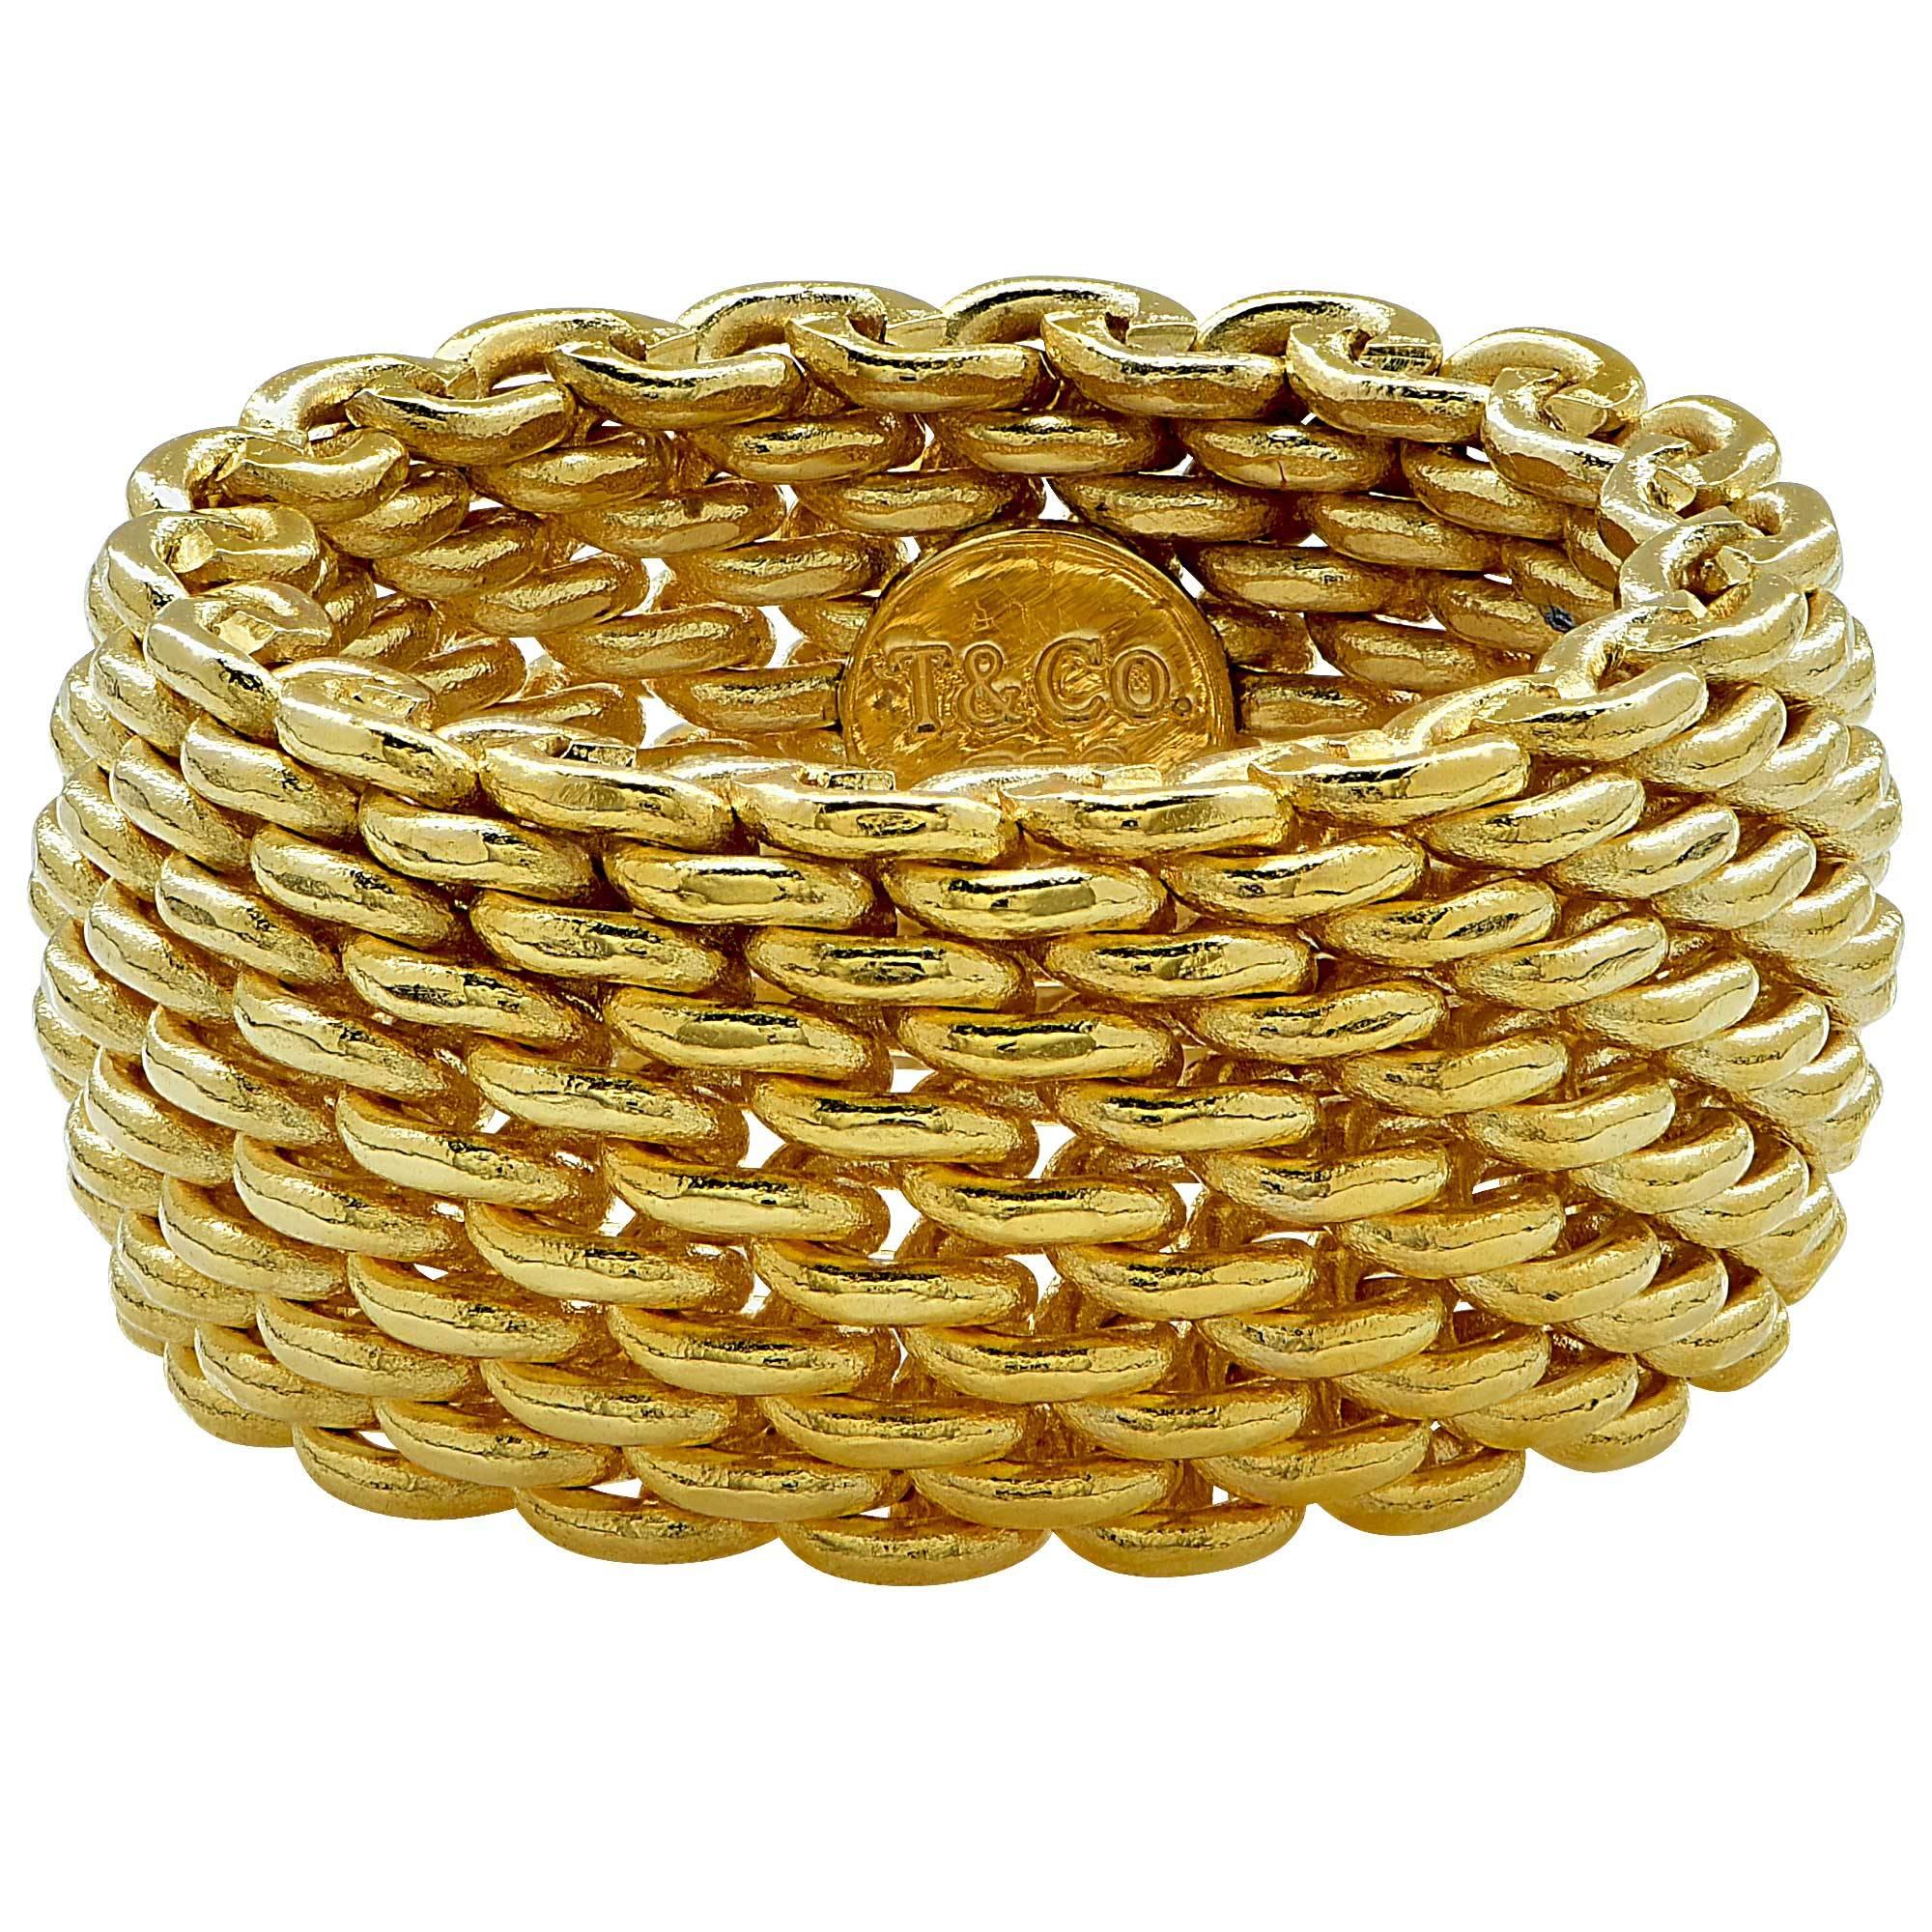 18K yellow gold Tiffany and Company mesh ring.

The classical ring is a size 5.5 and cannot be sized up or down. It measures 10mm wide.
It is stamped and tested as 18k gold.
The metal weight is 12.28 grams.

This Tiffany & Co. yellow gold